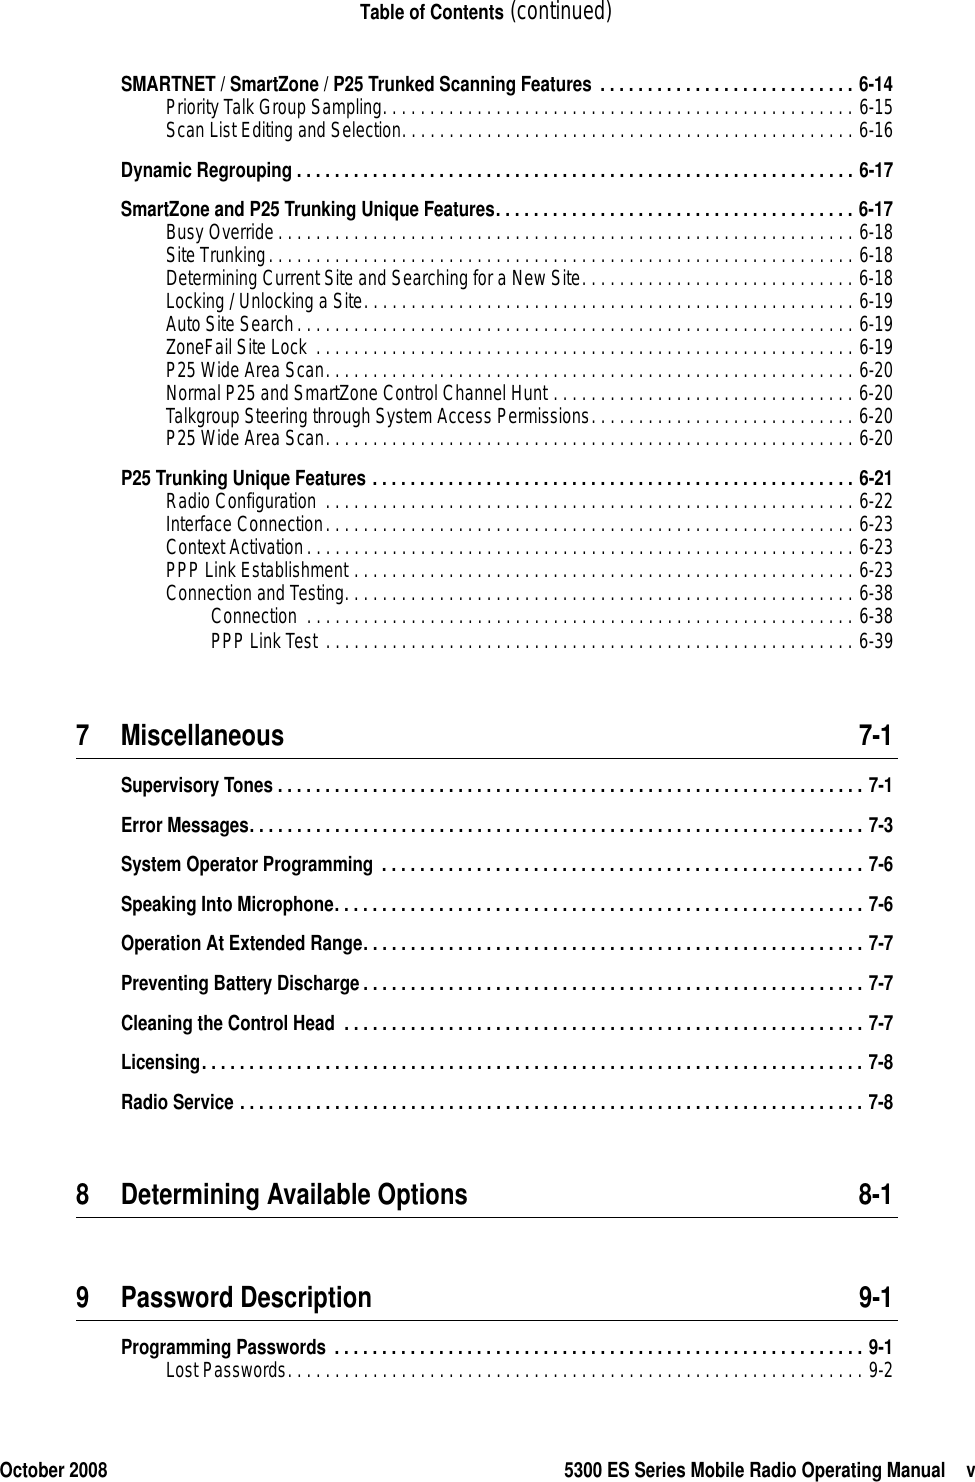 October 2008 5300 ES Series Mobile Radio Operating Manual vTable of Contents (continued)SMARTNET / SmartZone / P25 Trunked Scanning Features . . . . . . . . . . . . . . . . . . . . . . . . . . . 6-14Priority Talk Group Sampling. . . . . . . . . . . . . . . . . . . . . . . . . . . . . . . . . . . . . . . . . . . . . . . . . . 6-15Scan List Editing and Selection. . . . . . . . . . . . . . . . . . . . . . . . . . . . . . . . . . . . . . . . . . . . . . . . 6-16Dynamic Regrouping . . . . . . . . . . . . . . . . . . . . . . . . . . . . . . . . . . . . . . . . . . . . . . . . . . . . . . . . . . . 6-17SmartZone and P25 Trunking Unique Features. . . . . . . . . . . . . . . . . . . . . . . . . . . . . . . . . . . . . . 6-17Busy Override. . . . . . . . . . . . . . . . . . . . . . . . . . . . . . . . . . . . . . . . . . . . . . . . . . . . . . . . . . . . . 6-18Site Trunking. . . . . . . . . . . . . . . . . . . . . . . . . . . . . . . . . . . . . . . . . . . . . . . . . . . . . . . . . . . . . . 6-18Determining Current Site and Searching for a New Site. . . . . . . . . . . . . . . . . . . . . . . . . . . . . 6-18Locking / Unlocking a Site. . . . . . . . . . . . . . . . . . . . . . . . . . . . . . . . . . . . . . . . . . . . . . . . . . . . 6-19Auto Site Search. . . . . . . . . . . . . . . . . . . . . . . . . . . . . . . . . . . . . . . . . . . . . . . . . . . . . . . . . . . 6-19ZoneFail Site Lock . . . . . . . . . . . . . . . . . . . . . . . . . . . . . . . . . . . . . . . . . . . . . . . . . . . . . . . . . 6-19P25 Wide Area Scan. . . . . . . . . . . . . . . . . . . . . . . . . . . . . . . . . . . . . . . . . . . . . . . . . . . . . . . . 6-20Normal P25 and SmartZone Control Channel Hunt . . . . . . . . . . . . . . . . . . . . . . . . . . . . . . . . 6-20Talkgroup Steering through System Access Permissions. . . . . . . . . . . . . . . . . . . . . . . . . . . . 6-20P25 Wide Area Scan. . . . . . . . . . . . . . . . . . . . . . . . . . . . . . . . . . . . . . . . . . . . . . . . . . . . . . . . 6-20P25 Trunking Unique Features . . . . . . . . . . . . . . . . . . . . . . . . . . . . . . . . . . . . . . . . . . . . . . . . . . . 6-21Radio Configuration  . . . . . . . . . . . . . . . . . . . . . . . . . . . . . . . . . . . . . . . . . . . . . . . . . . . . . . . . 6-22Interface Connection. . . . . . . . . . . . . . . . . . . . . . . . . . . . . . . . . . . . . . . . . . . . . . . . . . . . . . . . 6-23Context Activation. . . . . . . . . . . . . . . . . . . . . . . . . . . . . . . . . . . . . . . . . . . . . . . . . . . . . . . . . . 6-23PPP Link Establishment . . . . . . . . . . . . . . . . . . . . . . . . . . . . . . . . . . . . . . . . . . . . . . . . . . . . . 6-23Connection and Testing. . . . . . . . . . . . . . . . . . . . . . . . . . . . . . . . . . . . . . . . . . . . . . . . . . . . . . 6-38Connection  . . . . . . . . . . . . . . . . . . . . . . . . . . . . . . . . . . . . . . . . . . . . . . . . . . . . . . . . . . 6-38PPP Link Test . . . . . . . . . . . . . . . . . . . . . . . . . . . . . . . . . . . . . . . . . . . . . . . . . . . . . . . . 6-397 Miscellaneous 7-1Supervisory Tones . . . . . . . . . . . . . . . . . . . . . . . . . . . . . . . . . . . . . . . . . . . . . . . . . . . . . . . . . . . . . . 7-1Error Messages. . . . . . . . . . . . . . . . . . . . . . . . . . . . . . . . . . . . . . . . . . . . . . . . . . . . . . . . . . . . . . . . . 7-3System Operator Programming . . . . . . . . . . . . . . . . . . . . . . . . . . . . . . . . . . . . . . . . . . . . . . . . . . . 7-6Speaking Into Microphone. . . . . . . . . . . . . . . . . . . . . . . . . . . . . . . . . . . . . . . . . . . . . . . . . . . . . . . . 7-6Operation At Extended Range. . . . . . . . . . . . . . . . . . . . . . . . . . . . . . . . . . . . . . . . . . . . . . . . . . . . . 7-7Preventing Battery Discharge. . . . . . . . . . . . . . . . . . . . . . . . . . . . . . . . . . . . . . . . . . . . . . . . . . . . . 7-7Cleaning the Control Head  . . . . . . . . . . . . . . . . . . . . . . . . . . . . . . . . . . . . . . . . . . . . . . . . . . . . . . . 7-7Licensing. . . . . . . . . . . . . . . . . . . . . . . . . . . . . . . . . . . . . . . . . . . . . . . . . . . . . . . . . . . . . . . . . . . . . . 7-8Radio Service . . . . . . . . . . . . . . . . . . . . . . . . . . . . . . . . . . . . . . . . . . . . . . . . . . . . . . . . . . . . . . . . . . 7-88 Determining Available Options 8-19 Password Description 9-1Programming Passwords  . . . . . . . . . . . . . . . . . . . . . . . . . . . . . . . . . . . . . . . . . . . . . . . . . . . . . . . . 9-1Lost Passwords. . . . . . . . . . . . . . . . . . . . . . . . . . . . . . . . . . . . . . . . . . . . . . . . . . . . . . . . . . . . . 9-2